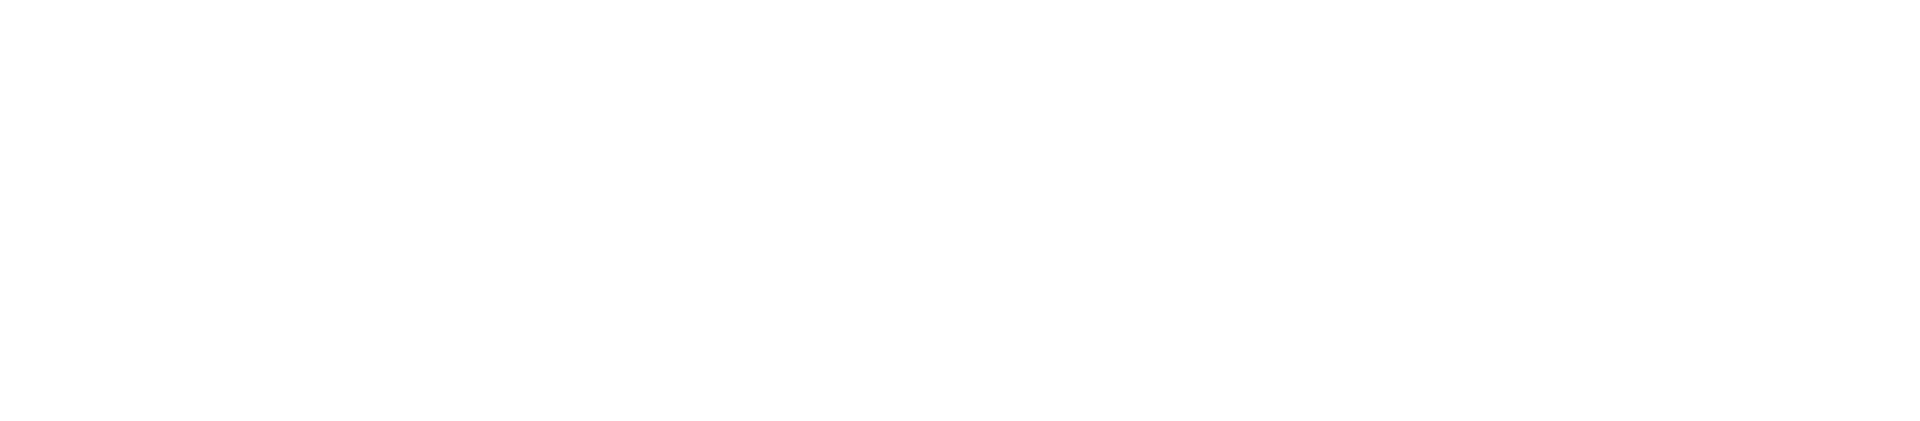 Assets_Elevated_Logo_Wht